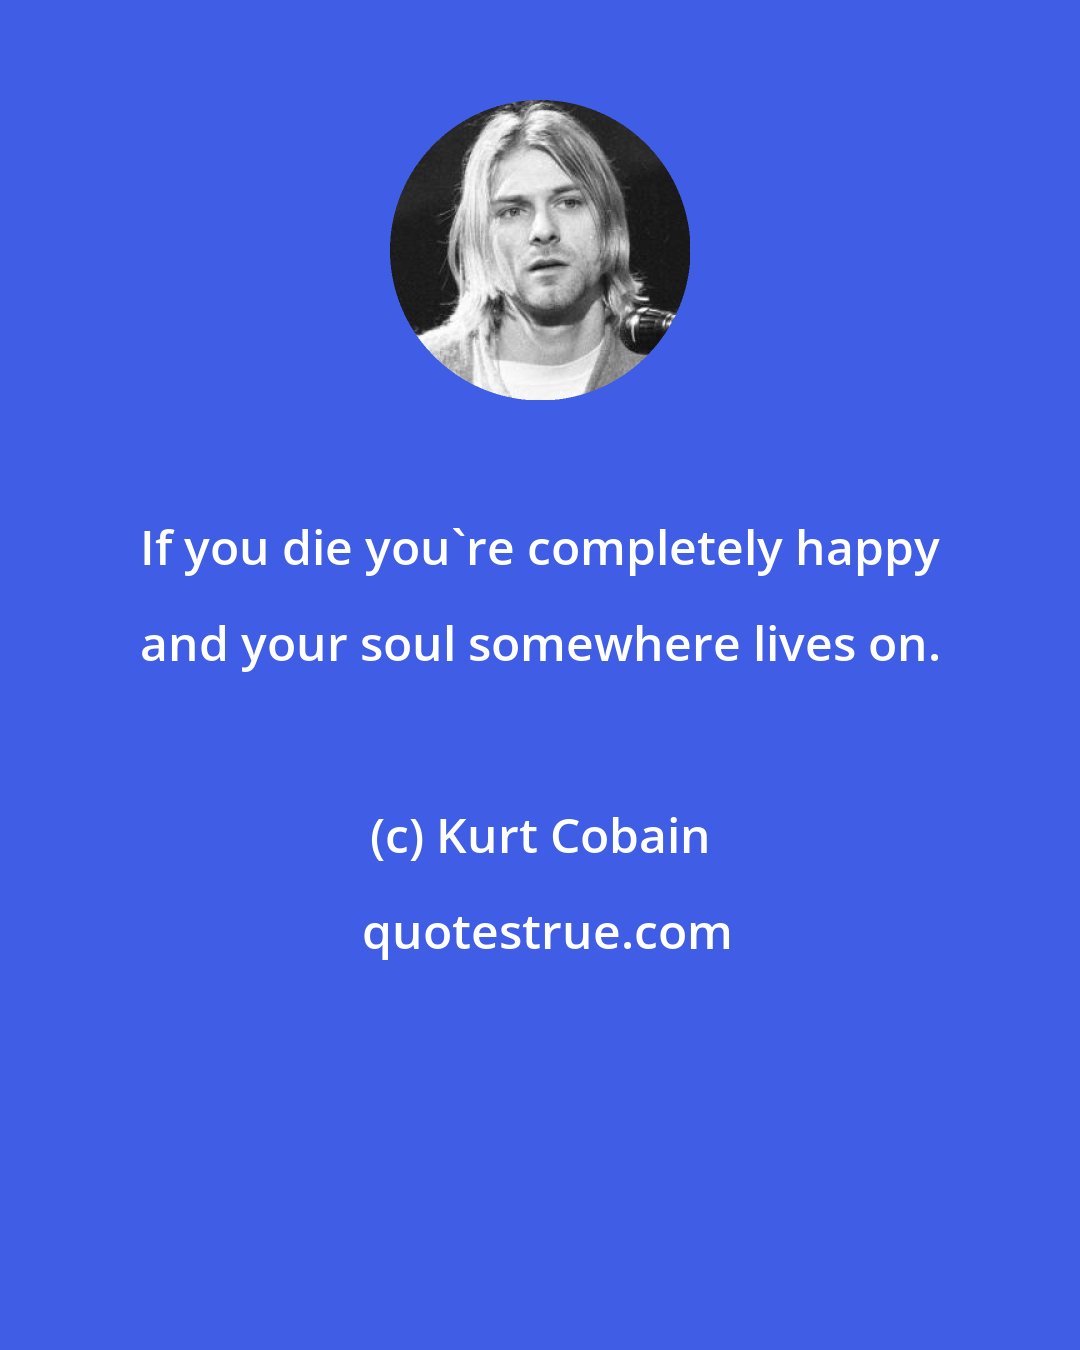 Kurt Cobain: If you die you're completely happy and your soul somewhere lives on.